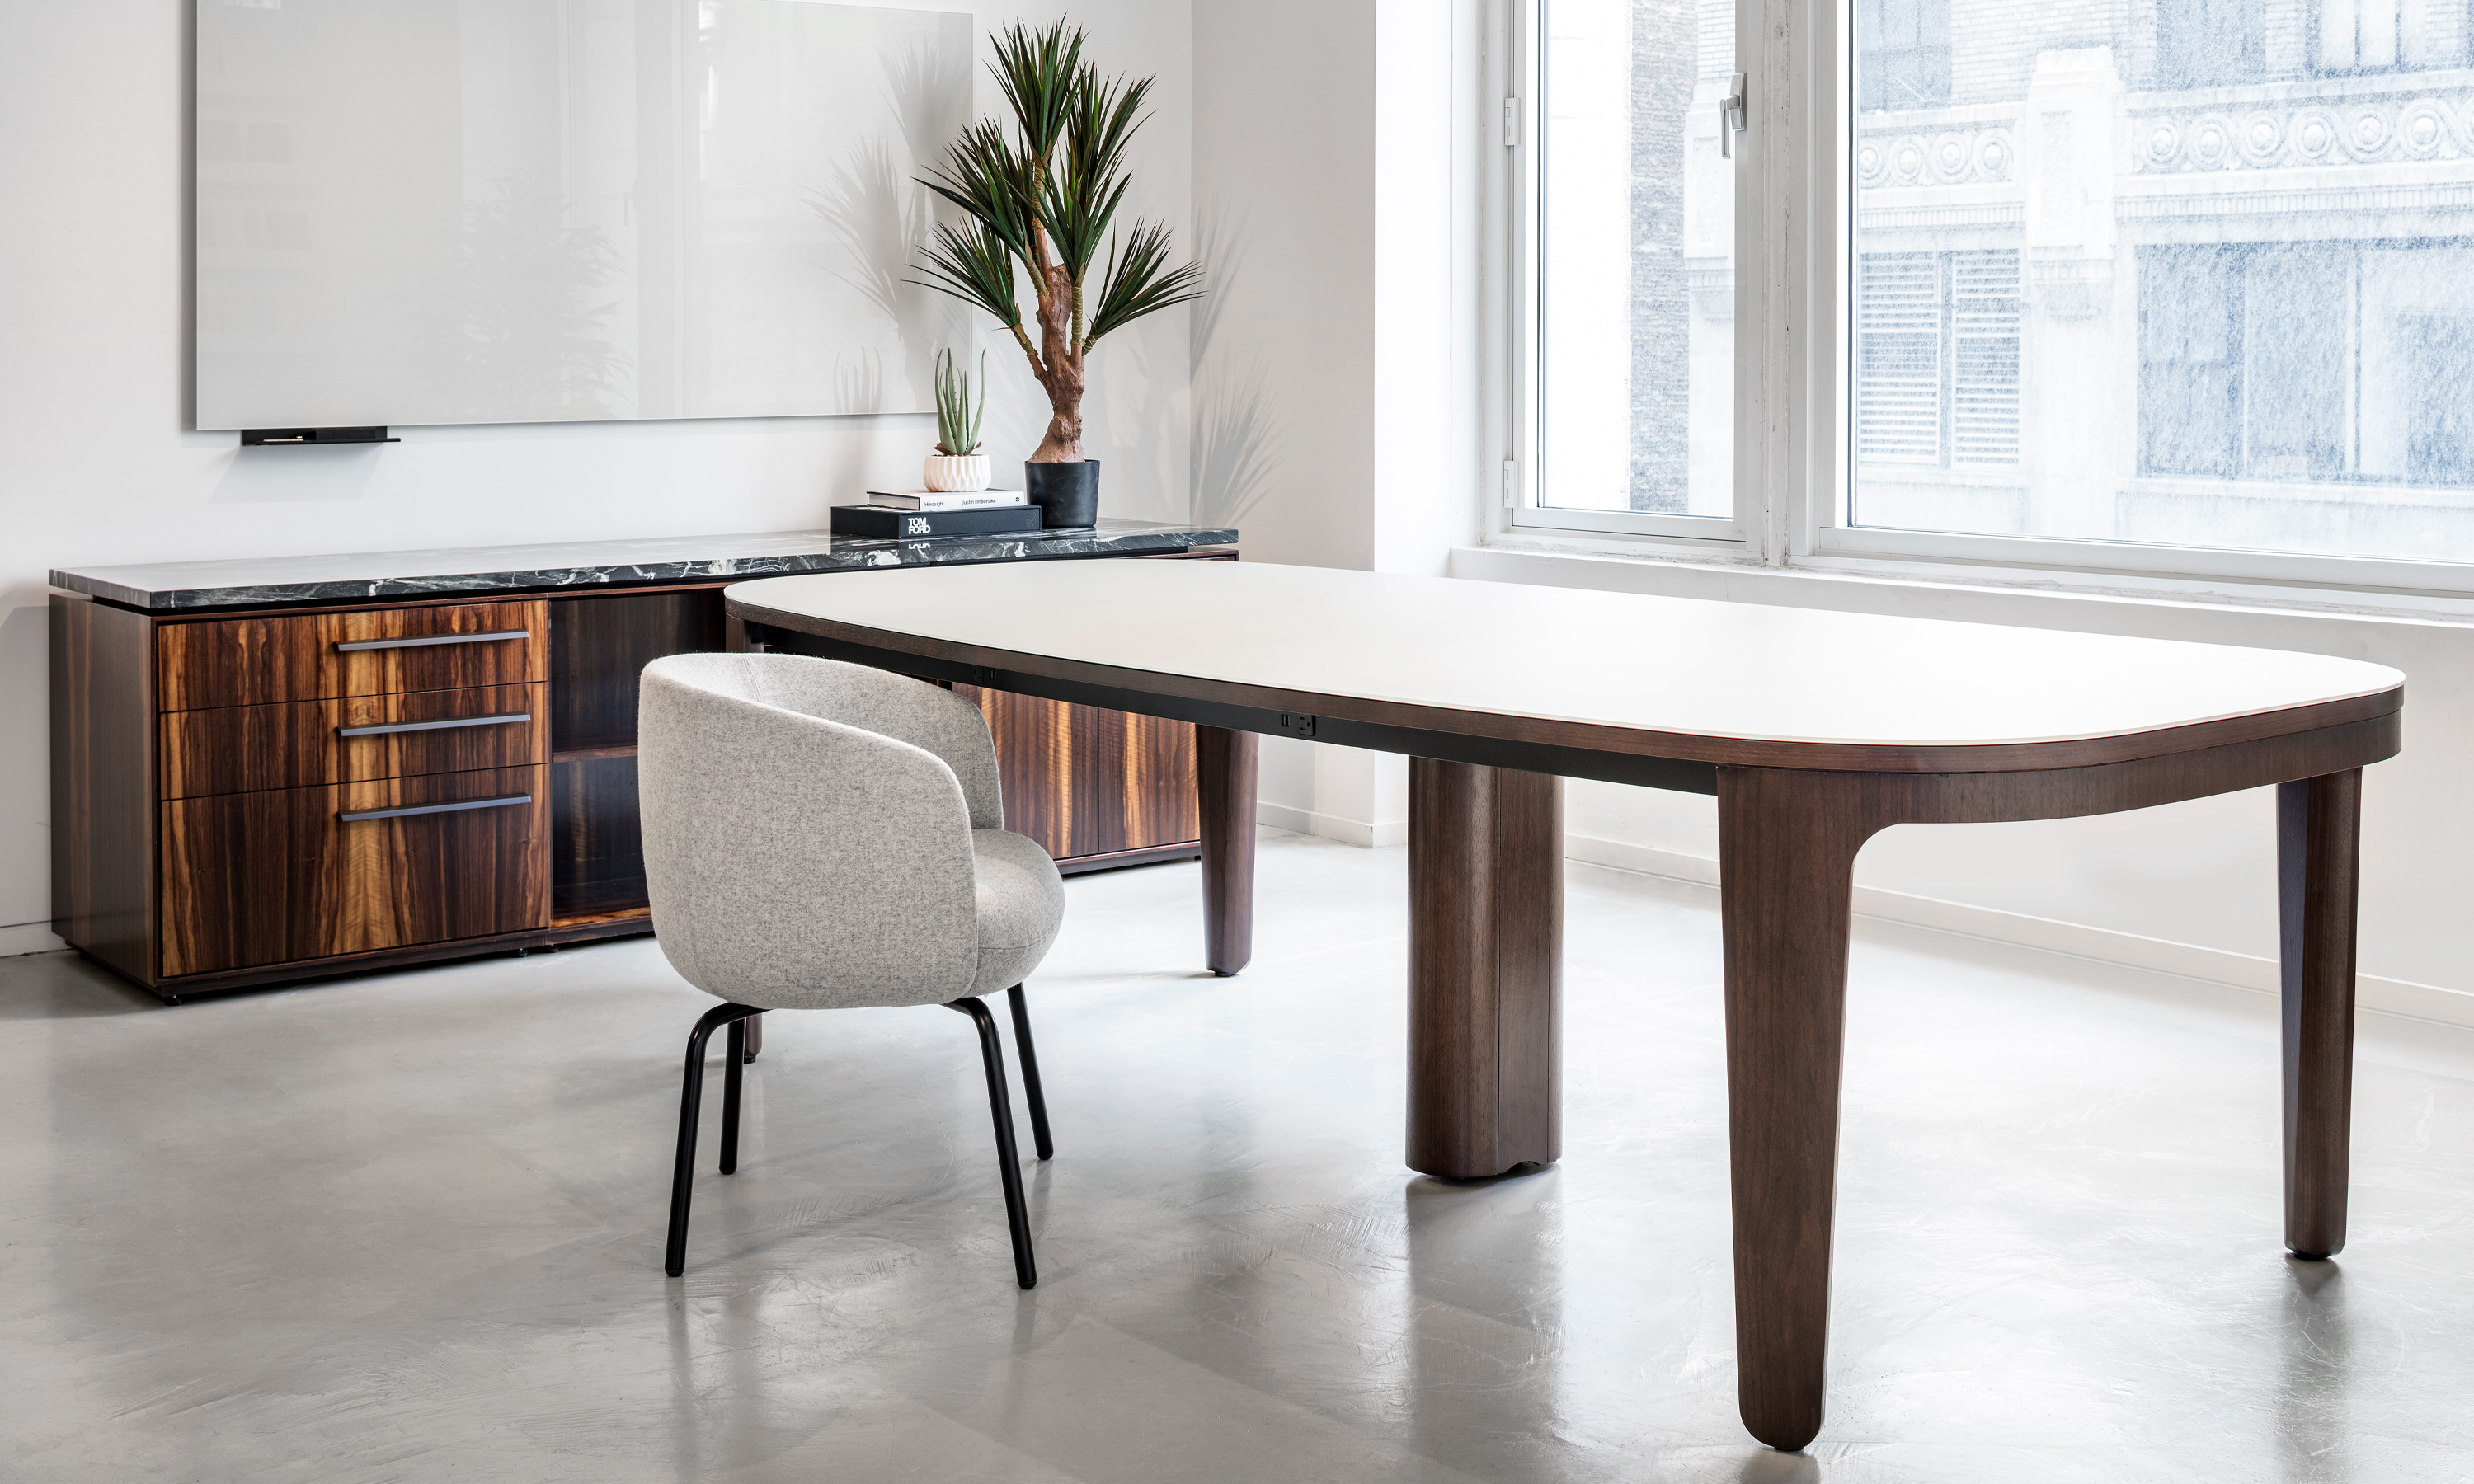 Alev Meeting designed by Birsel + Seck, Ayse Birsel and Bibi Seck. Alev Meeting is a Mid century modern conference table. Available in veneer. The table has an organic shape and was inspired by mid century modern and Scandinavian design. It features rounded edges and legs. Alev Meeting also features power and data connectivity depending on your conference room needs. Both tabletop and subtop power are available.  
Conference table, organic shape, mid century modern conference table, Scandinavian design table, robust power conference table, veneer conference table, birsel + seck, ayse birsel, bibi seck,